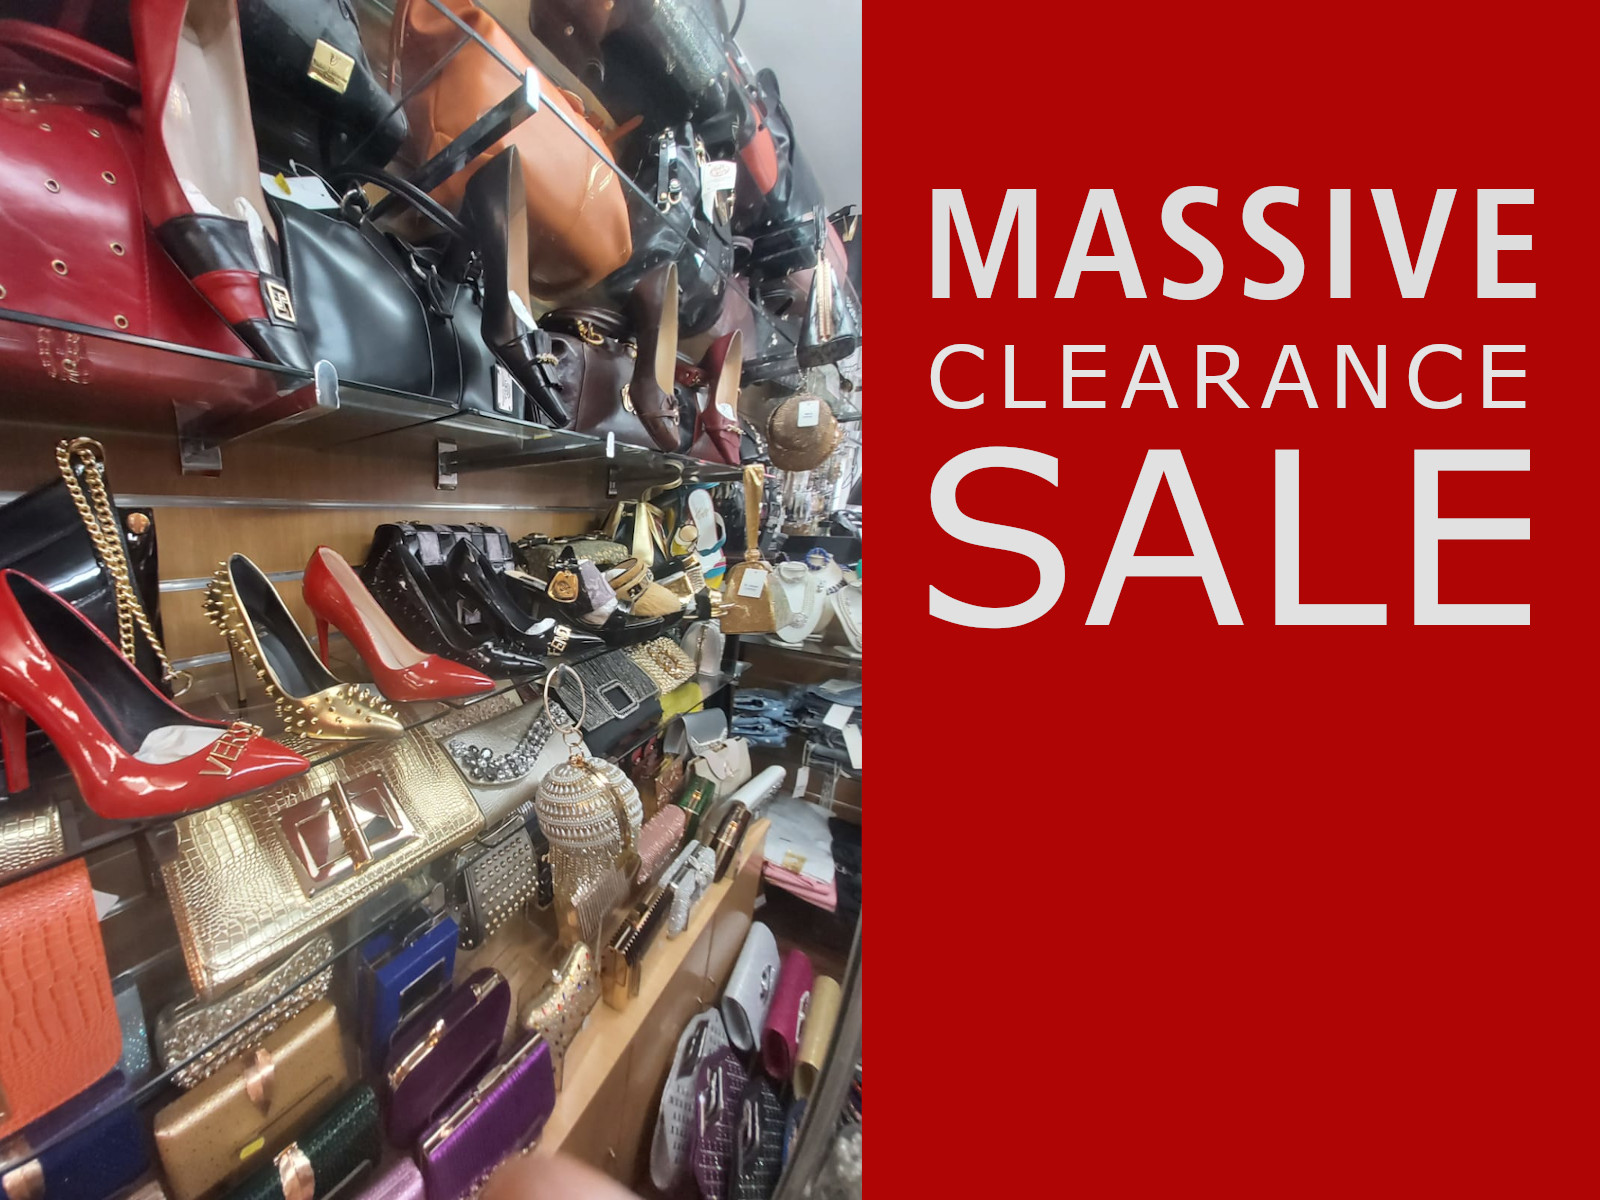 Biggest Clearance Sale Ever